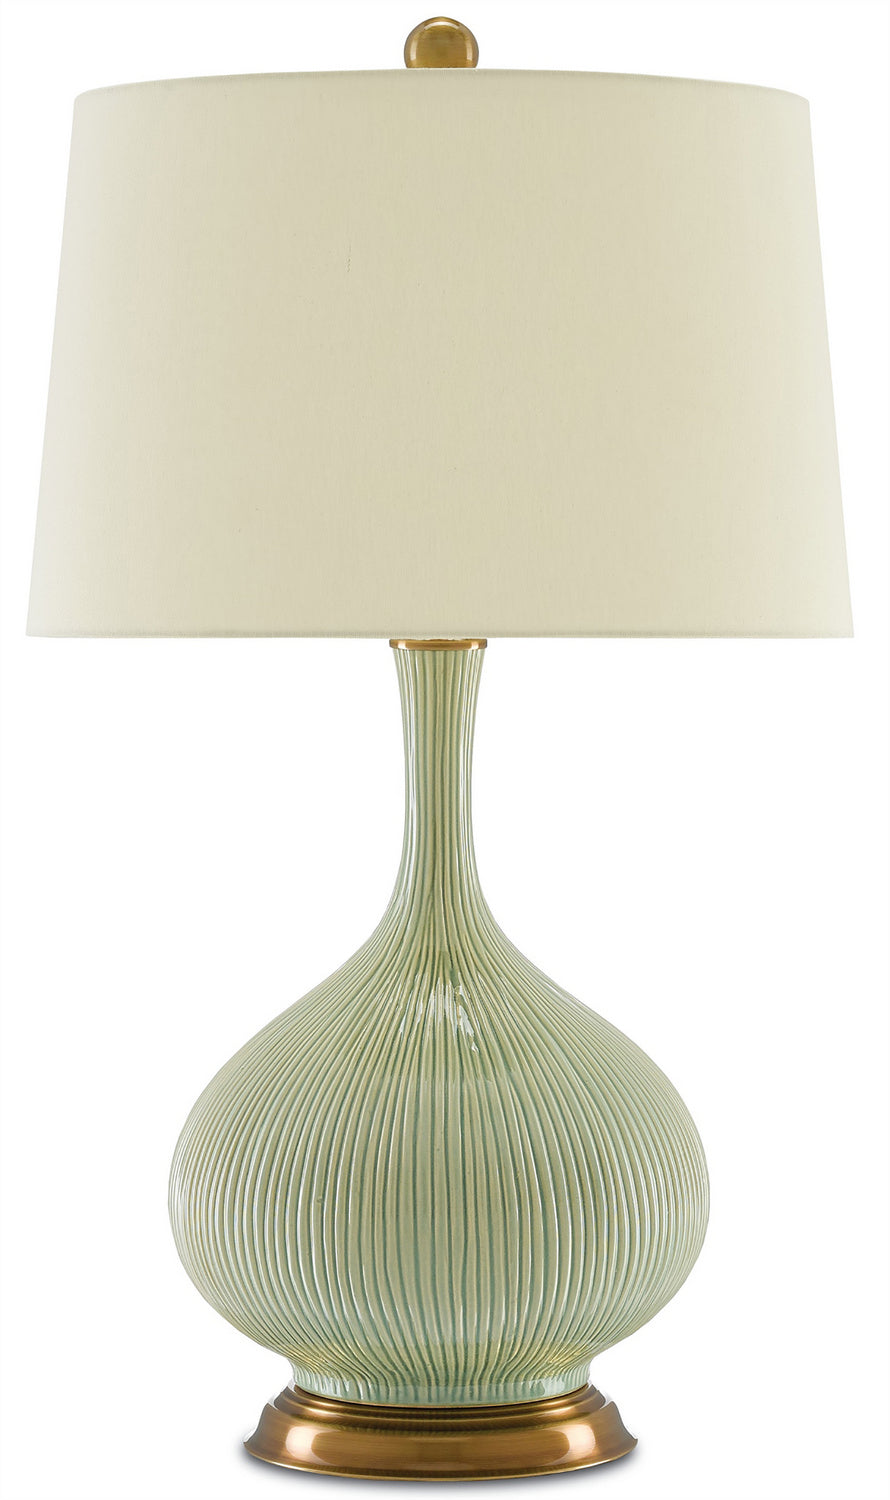 One Light Table Lamp from the Cait collection in Grass Green/Antique Brass finish